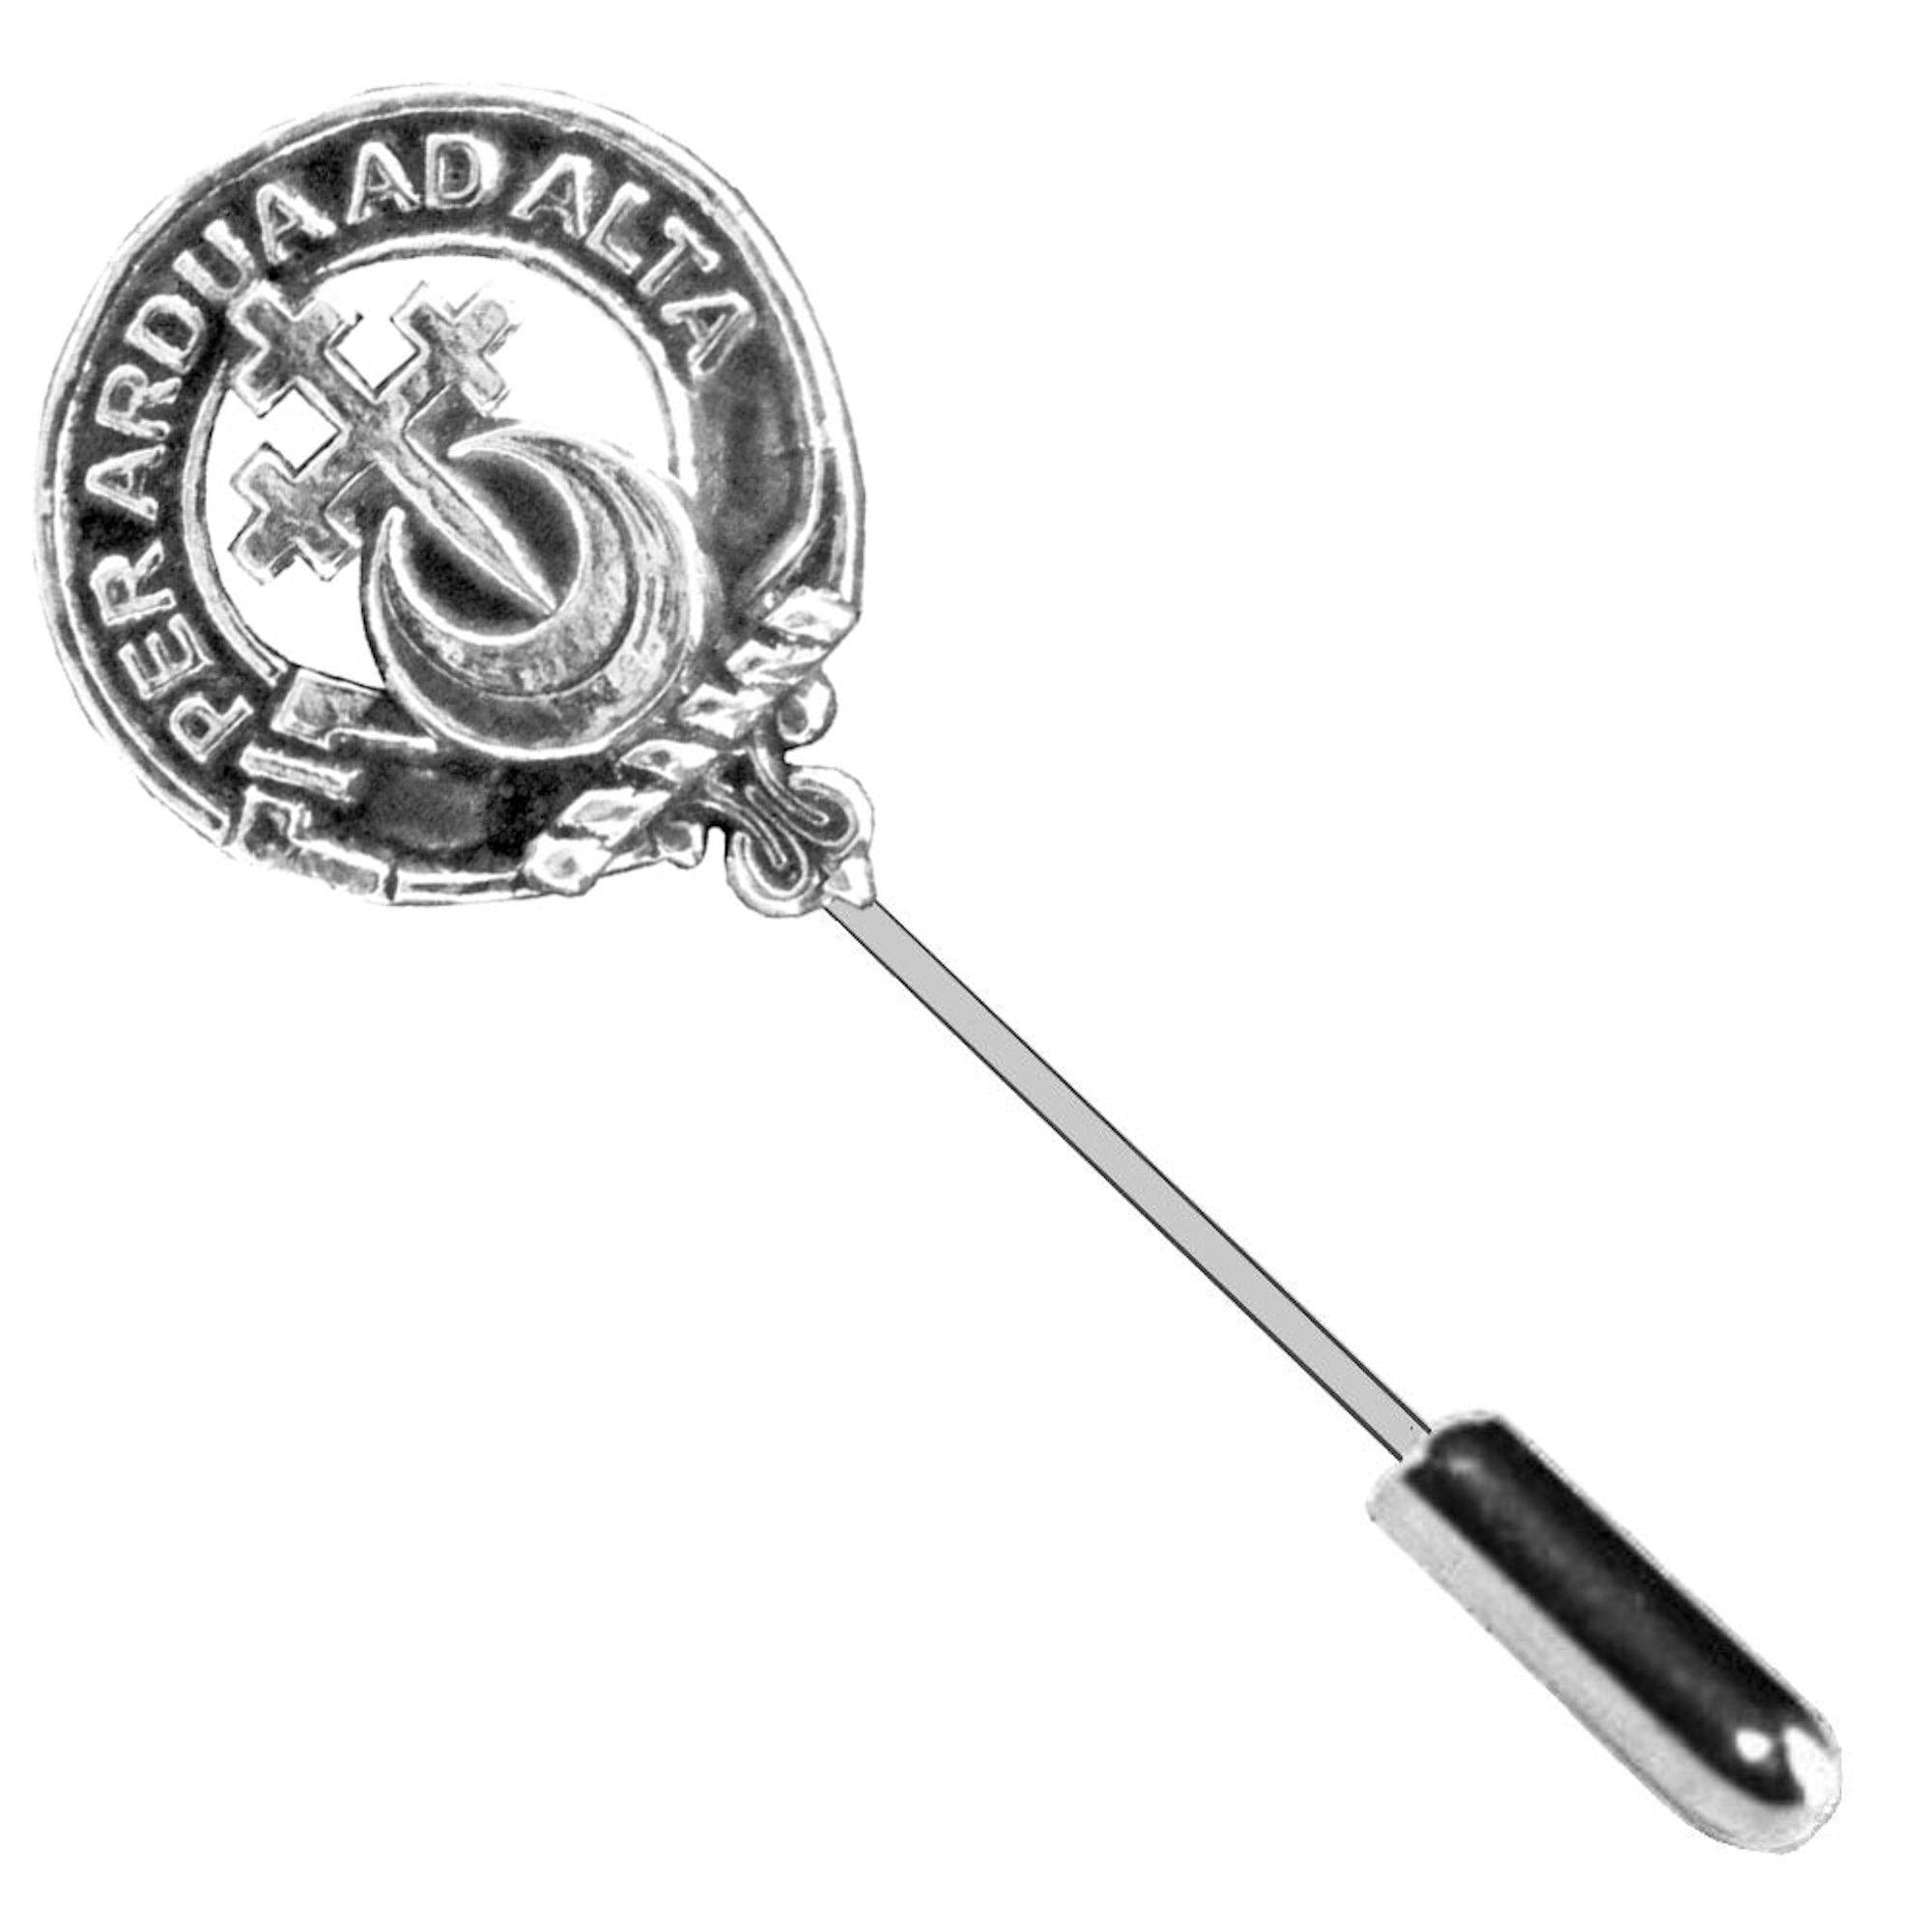 Hannay Clan Crest Stick or Cravat pin, Sterling Silver